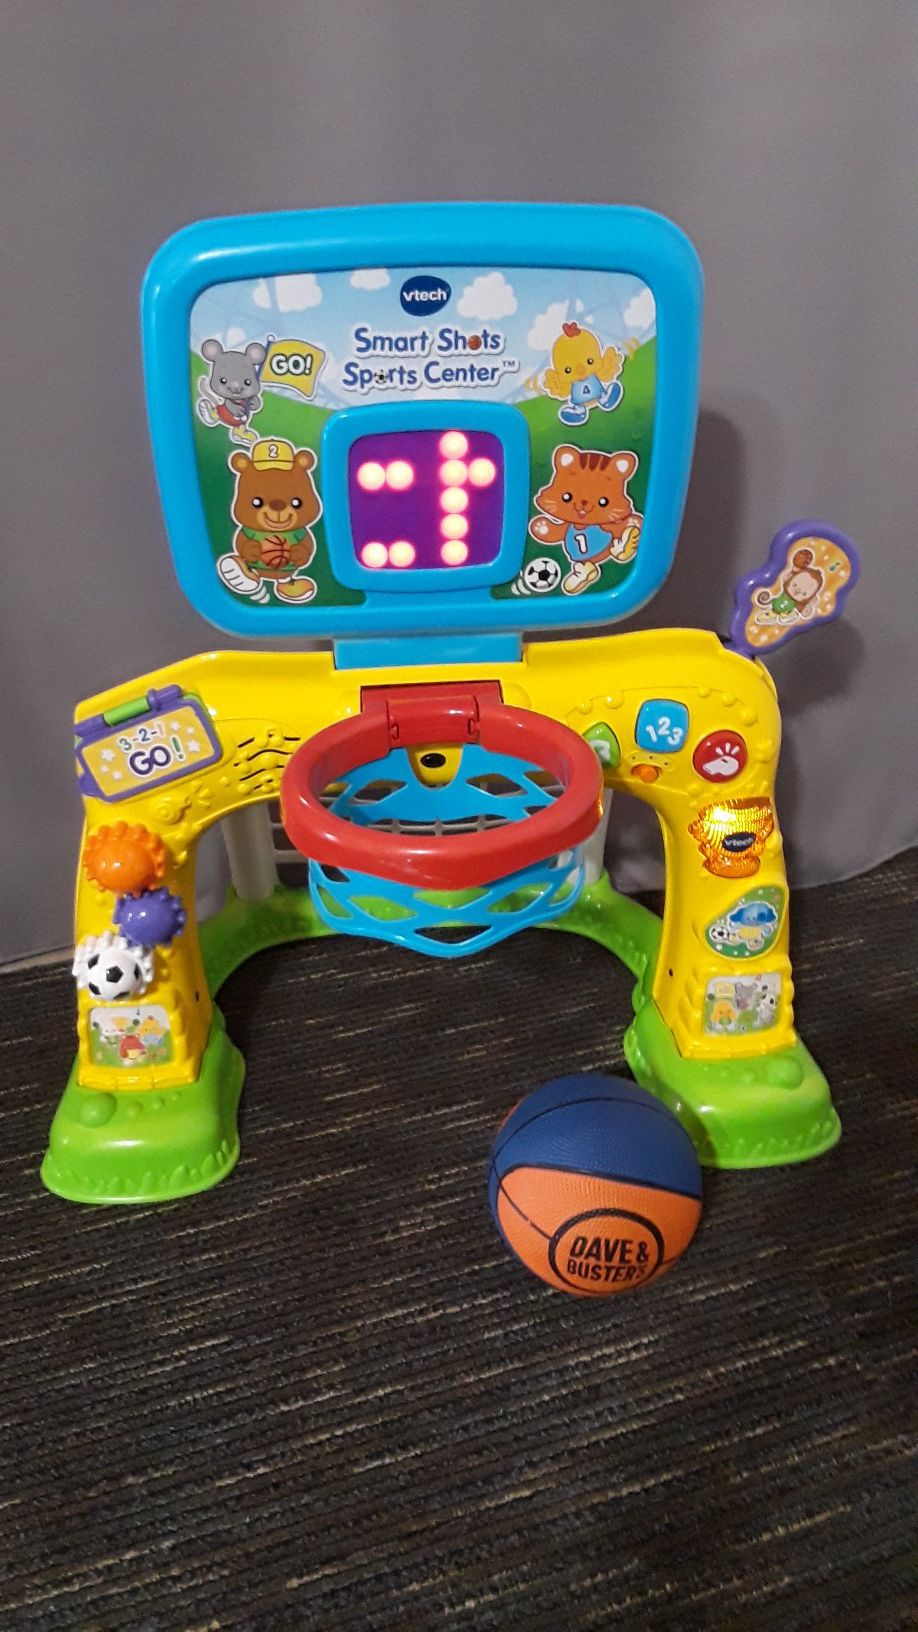 Basketball and soccer toy with music and lights, practicaly new.